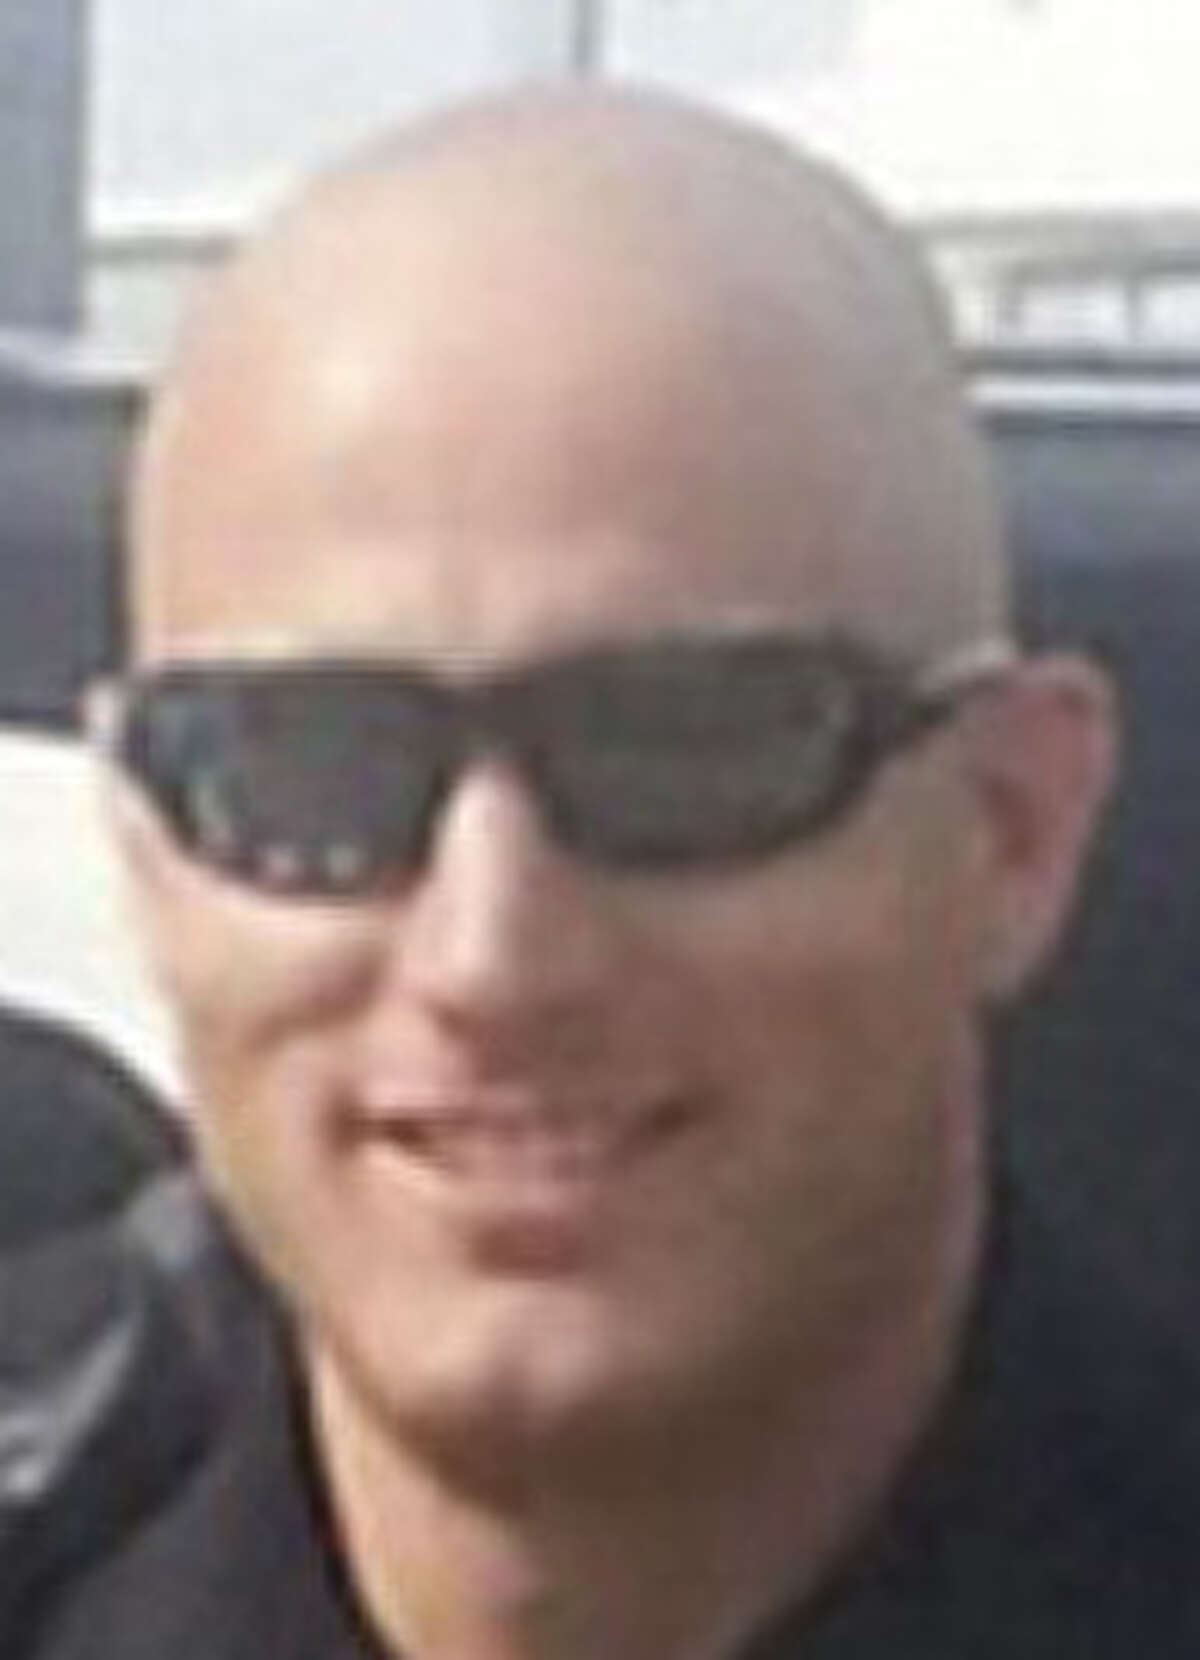 Robert Deckard, 31, is in critical but stable condition at the San Antonio Military Medical Center.